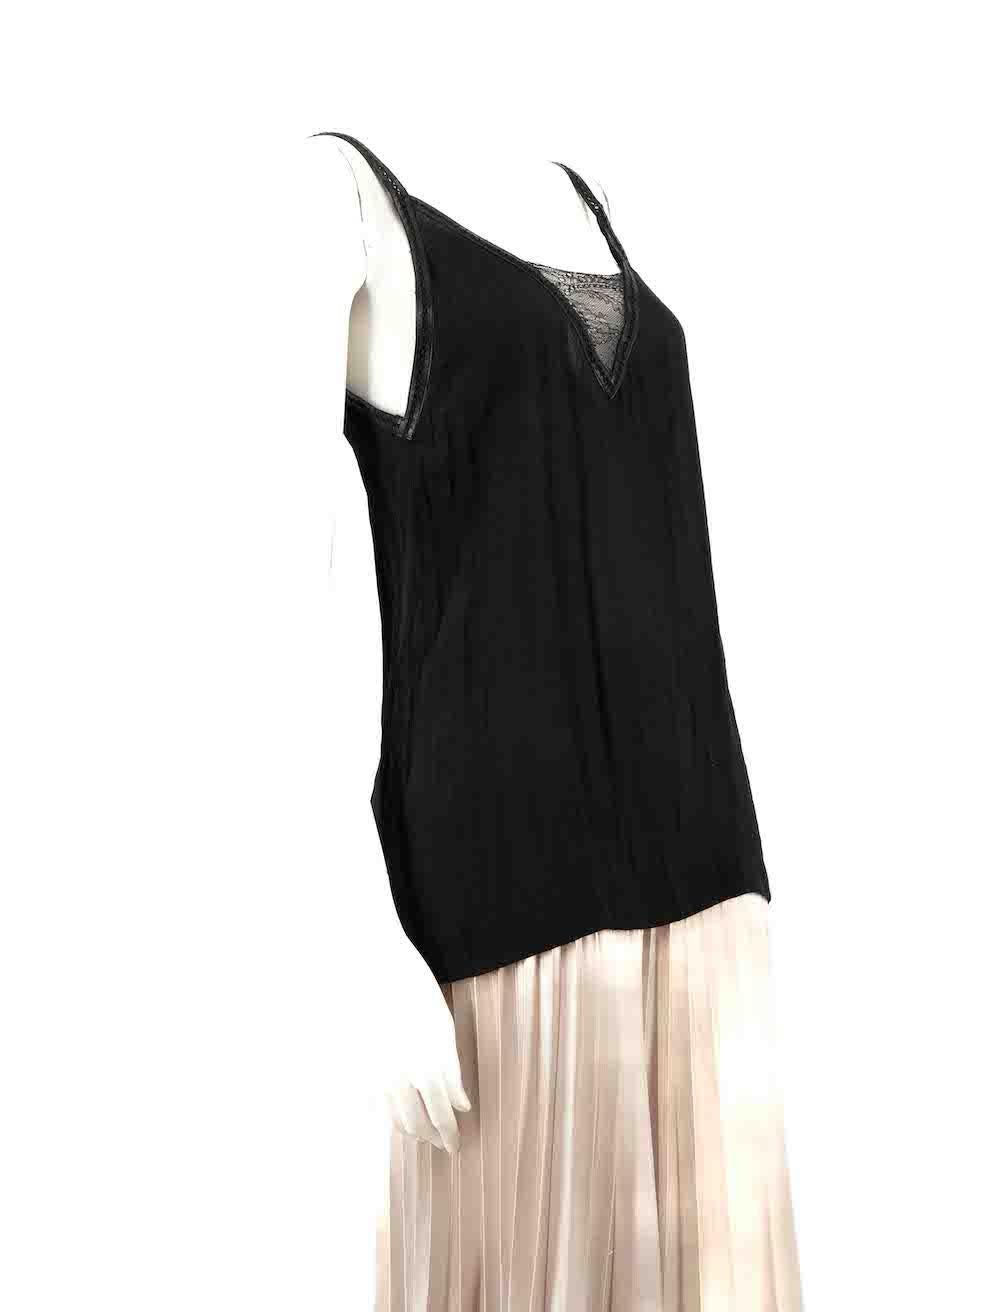 CONDITION is Very good. Minimal wear to top is evident. There is a small pluck to the weave at the front of the top on this used Maje designer resale item.
 
 Details
 Black
 Viscose
 Tank top
 Lace front panel
 Leather straps and trim
 Sheer
 
 
